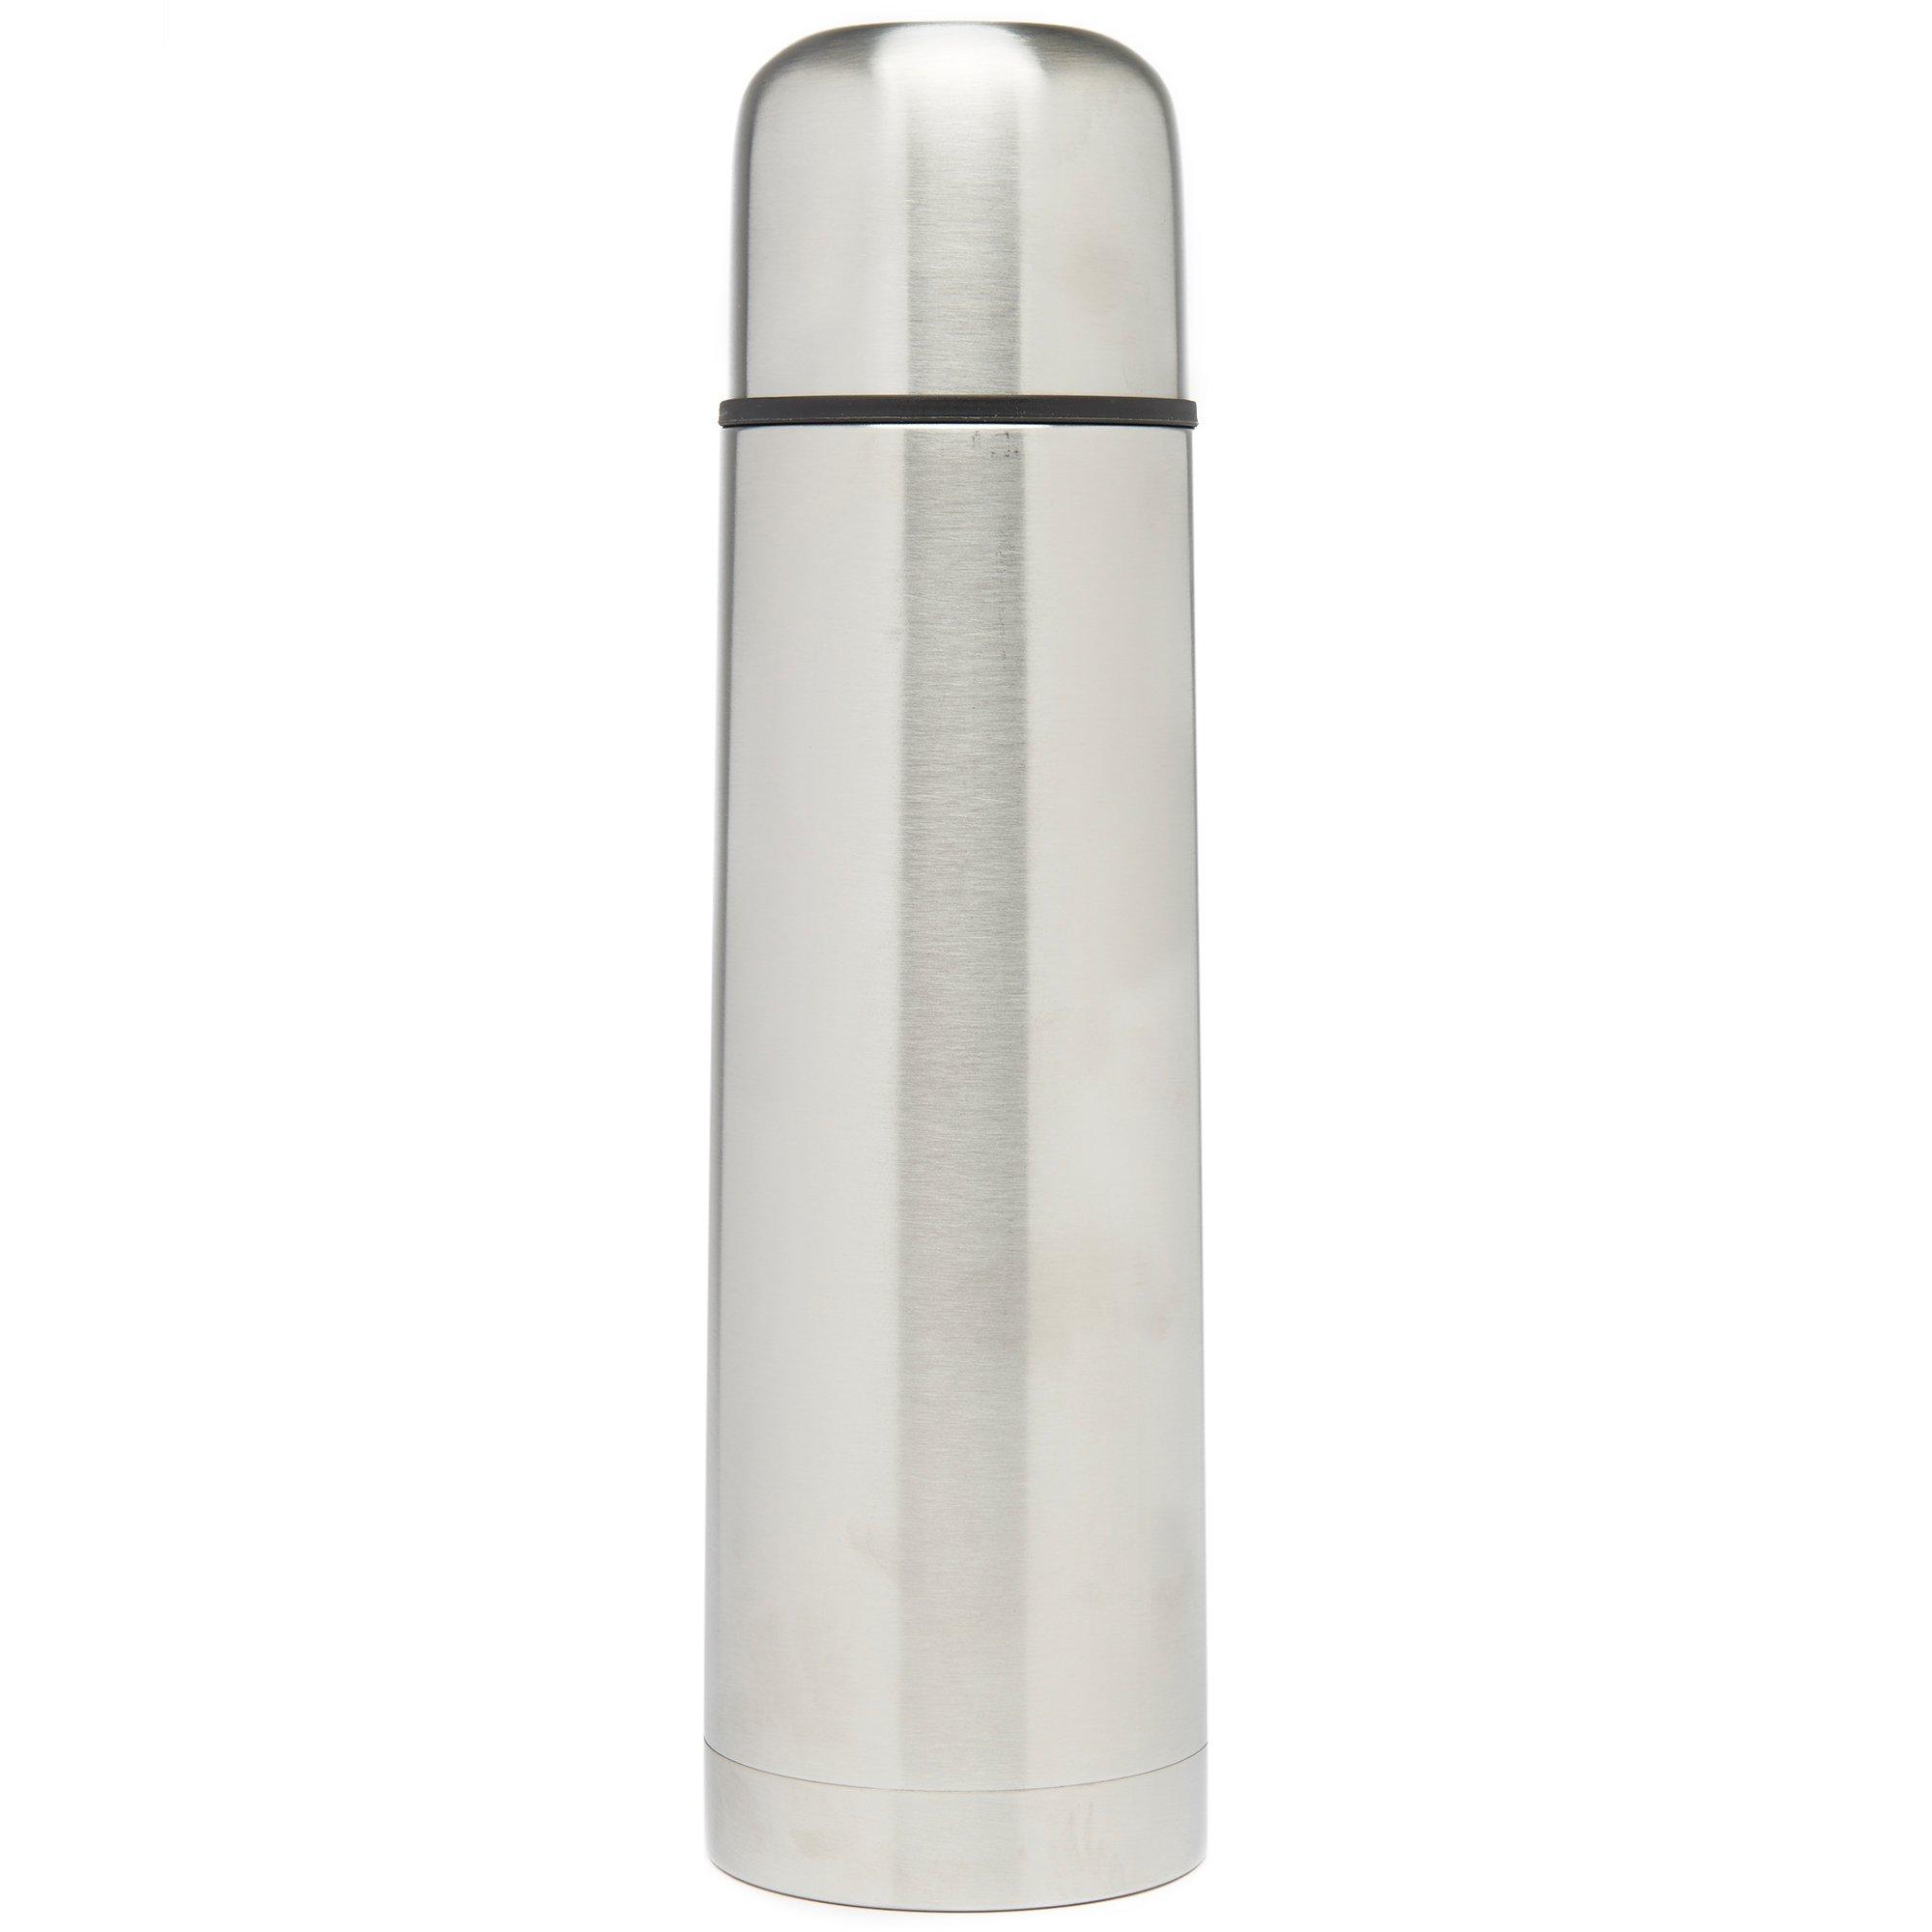 Eurohike Stainless Steel Flask 1L Review